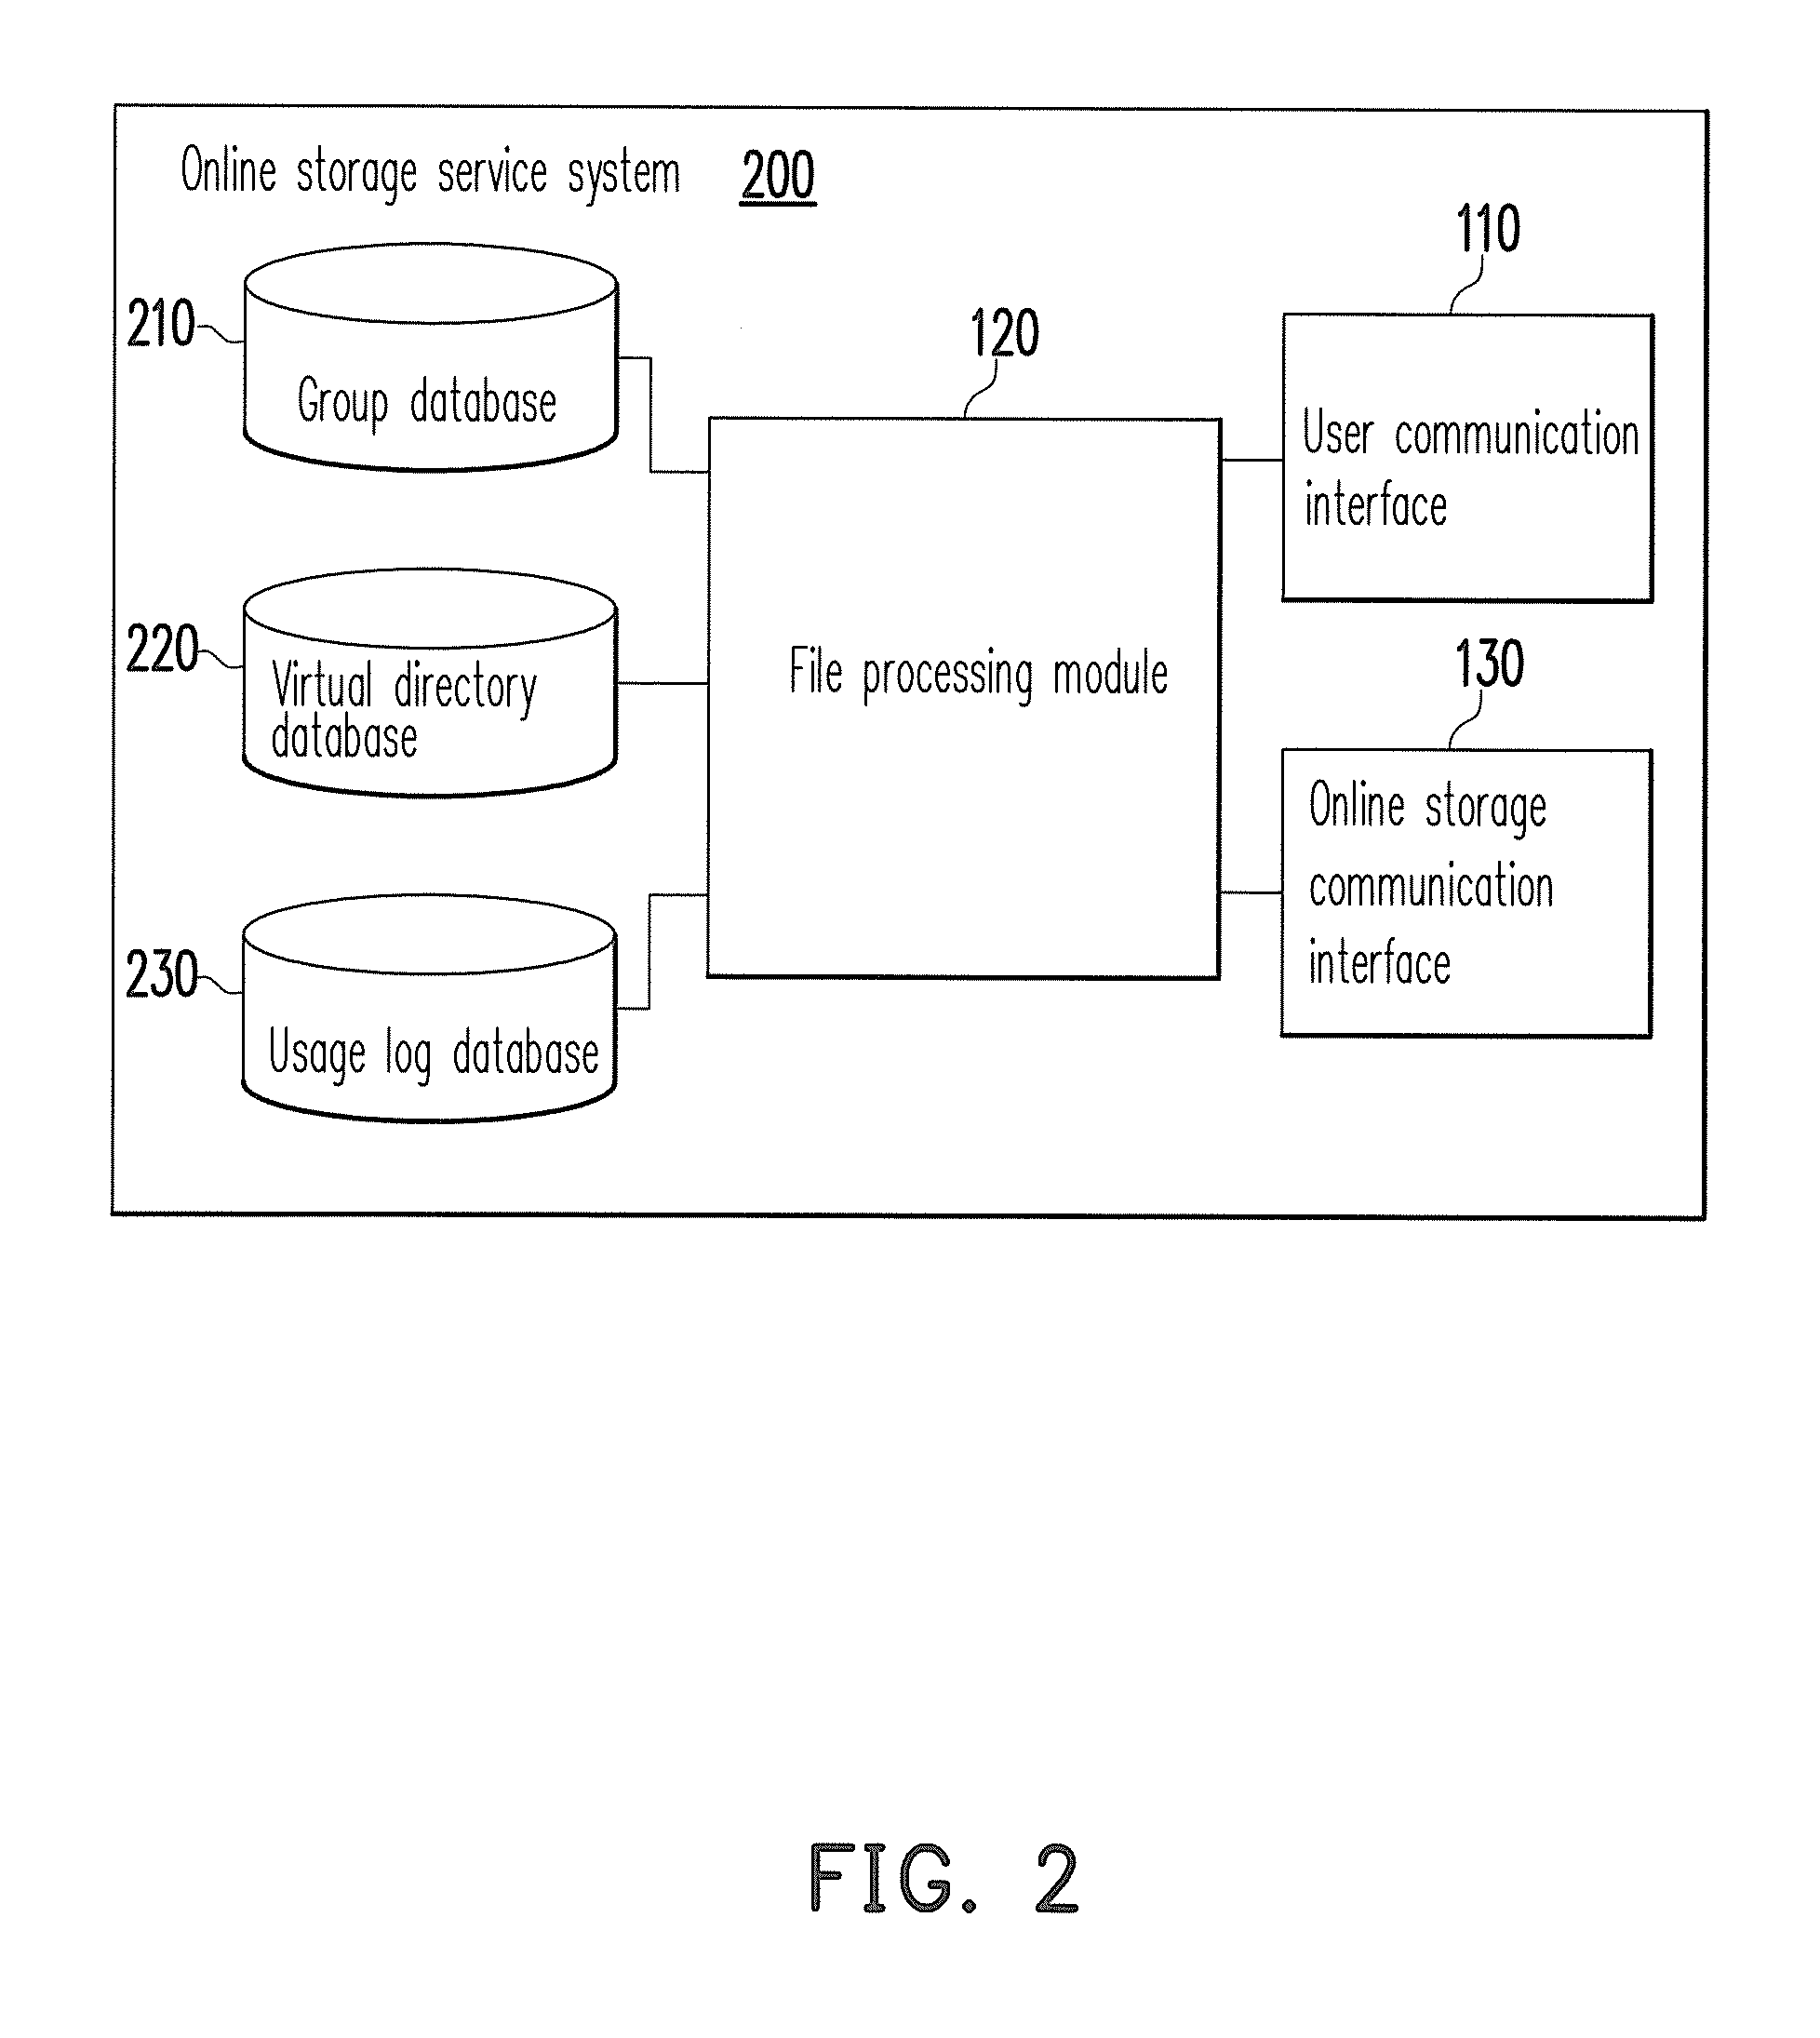 System and method for sharing online storage services among multiple users